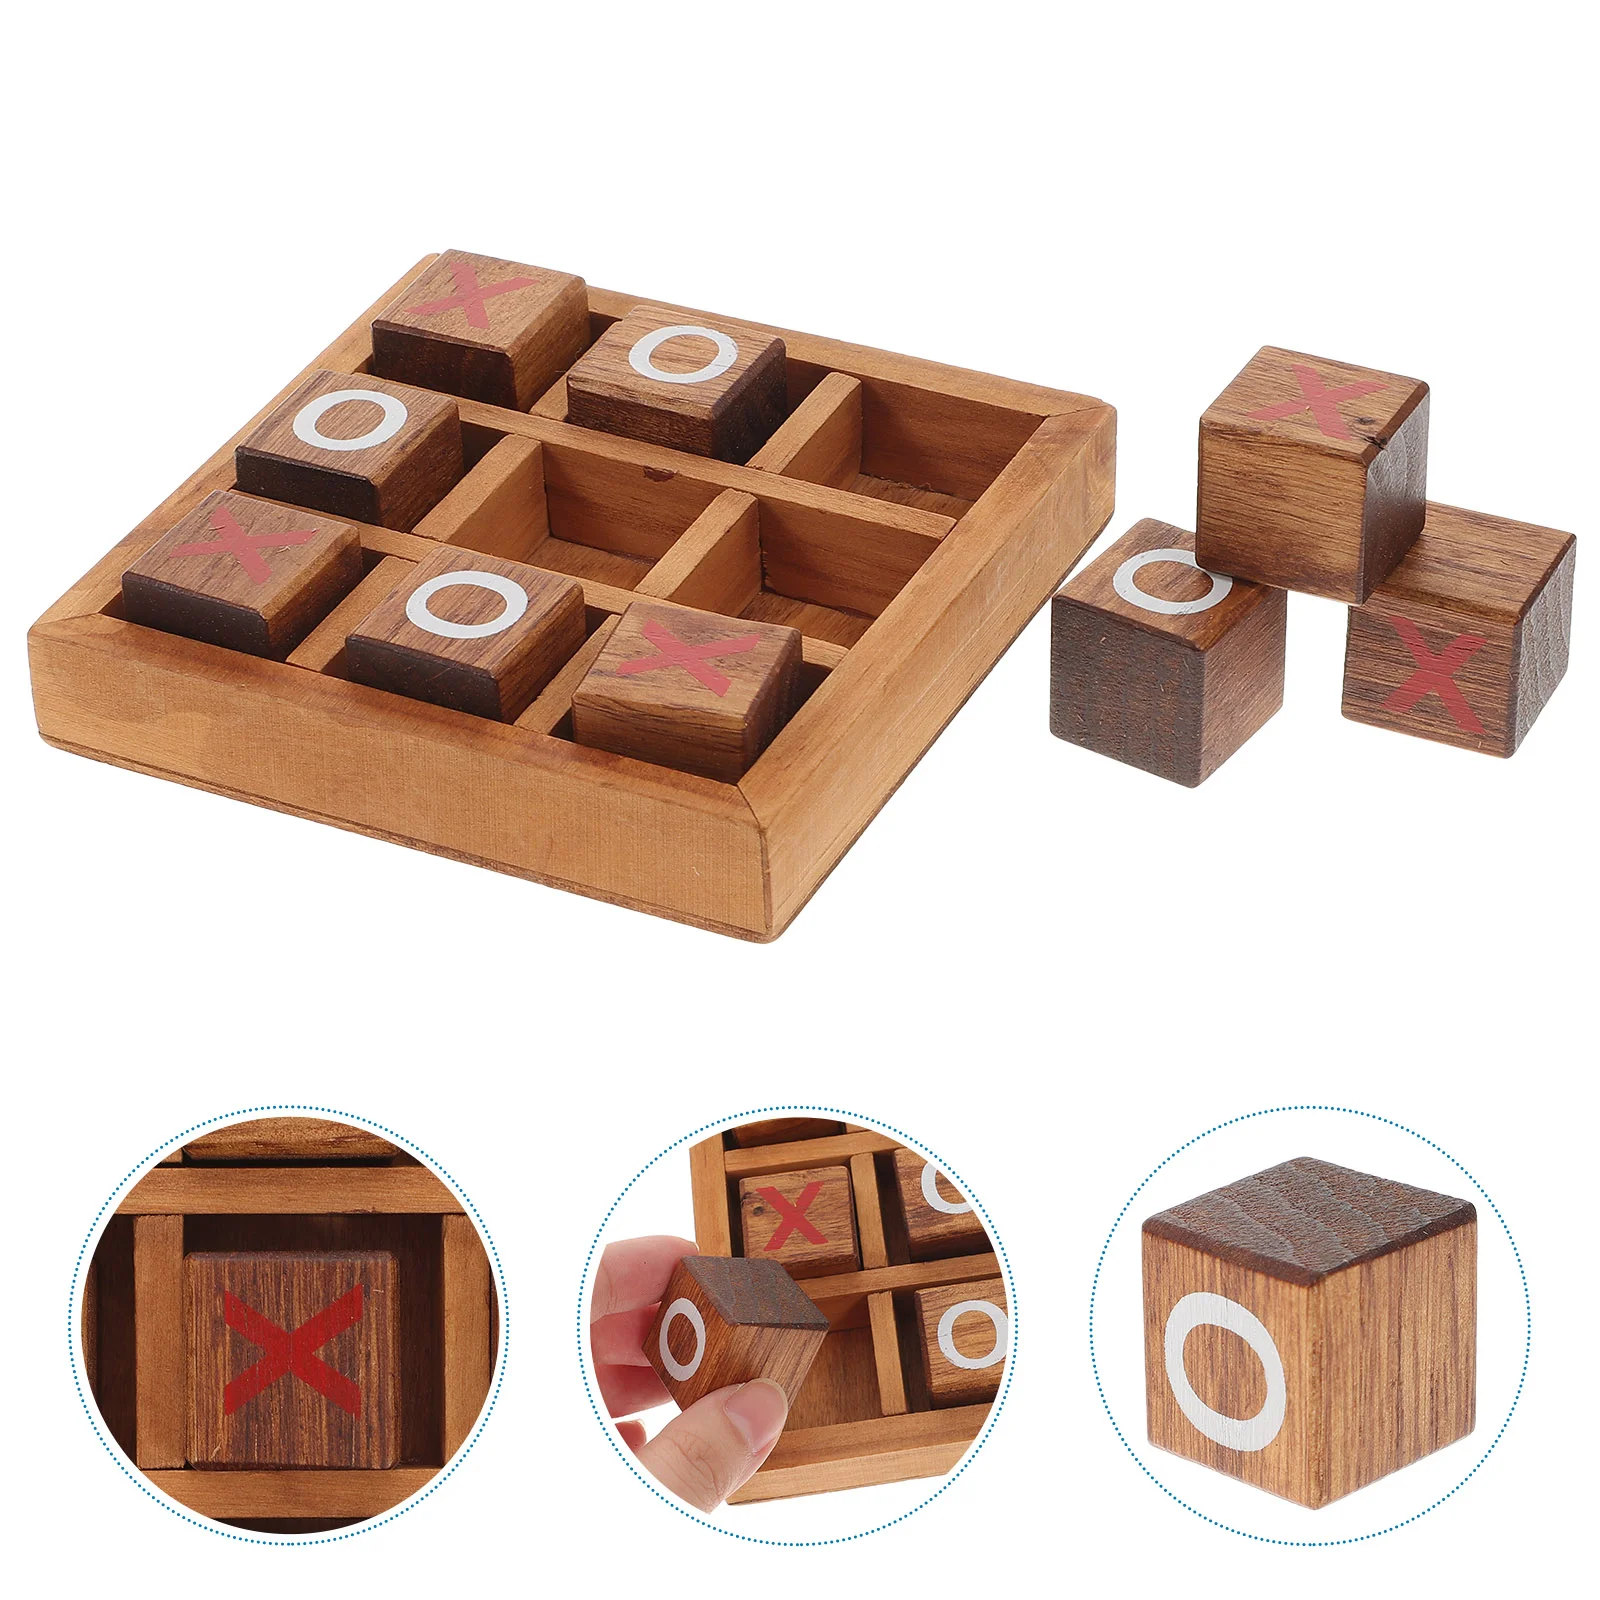 Tic Toe Educational Toy Tic Toe Game Wooden Toe Classic Game Toe Wooden Game Interactive Toy for Kids